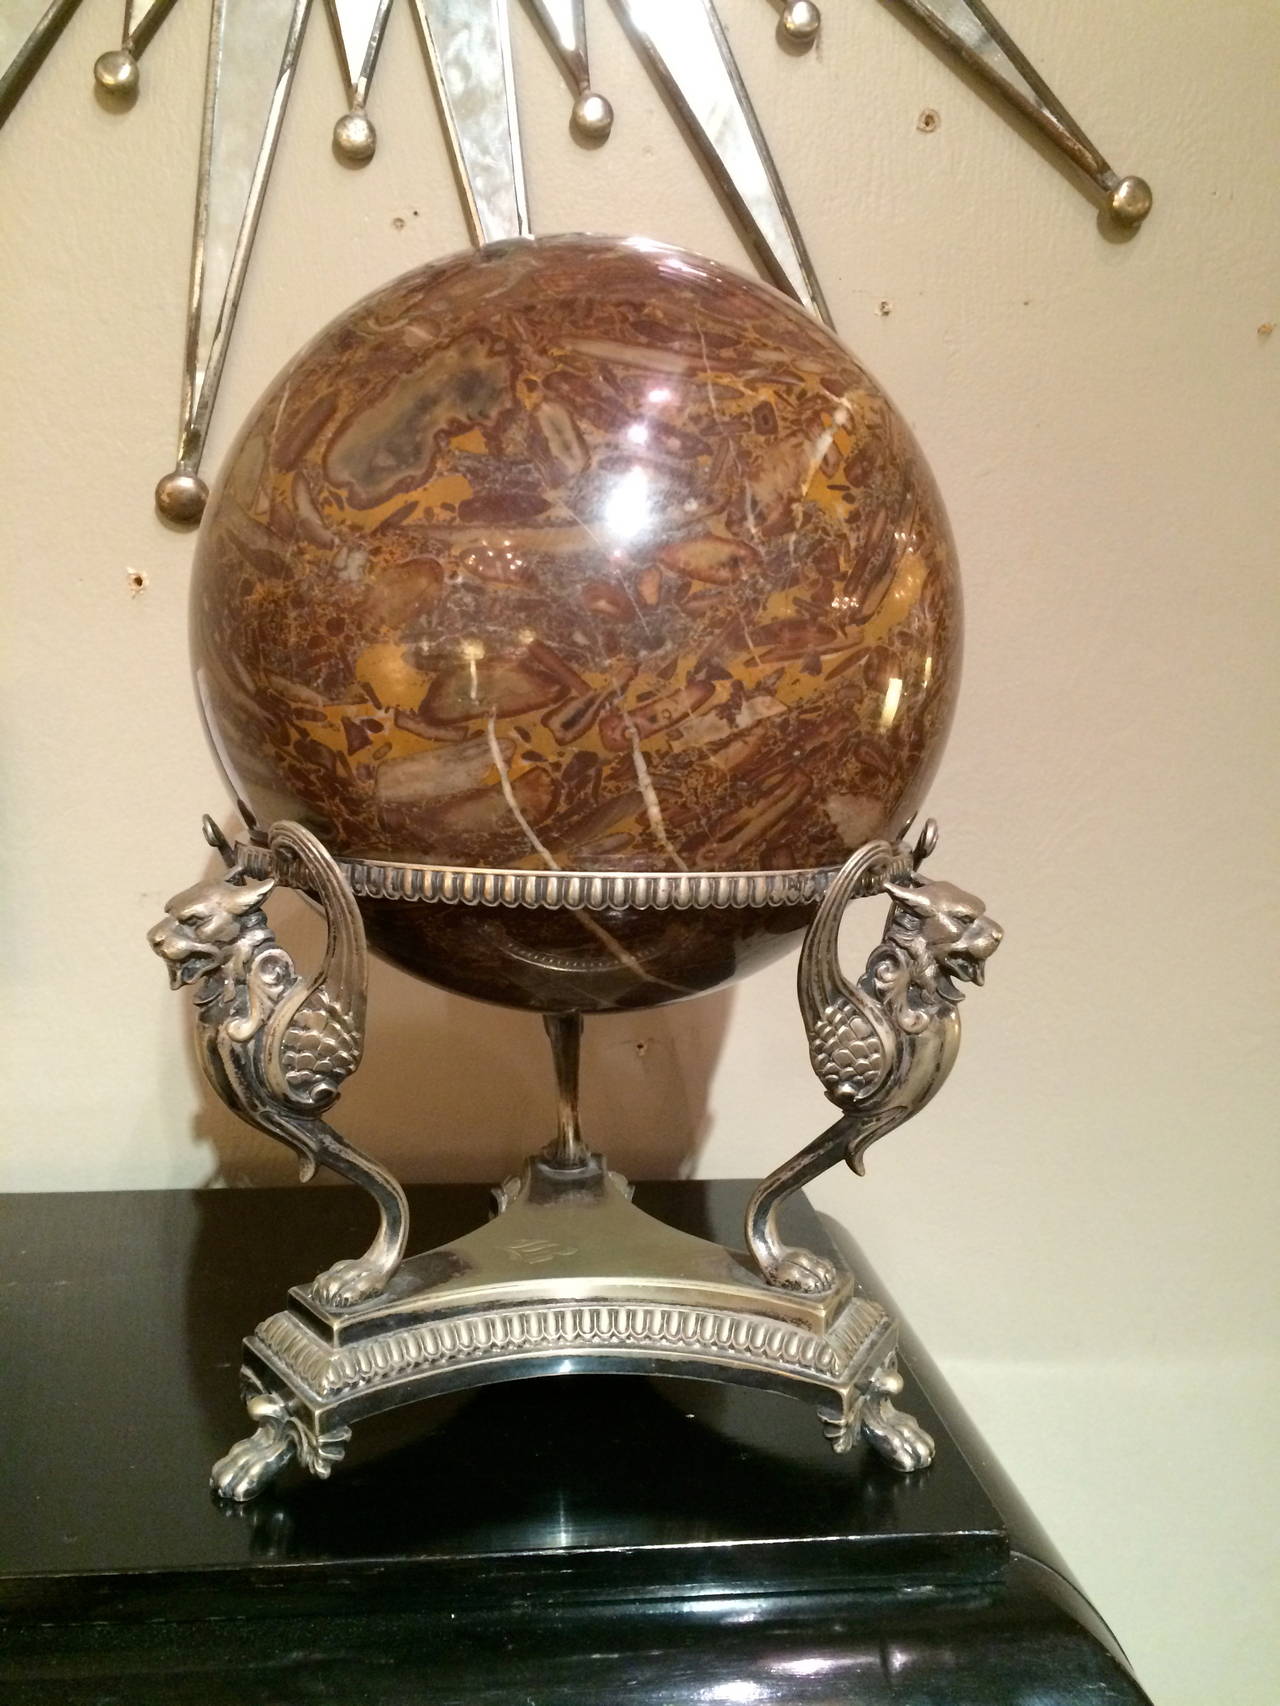 Large marble orb on a silver plated Edwardian tripod stand supported by winged griffins on paw feet. A unique decorative piece.